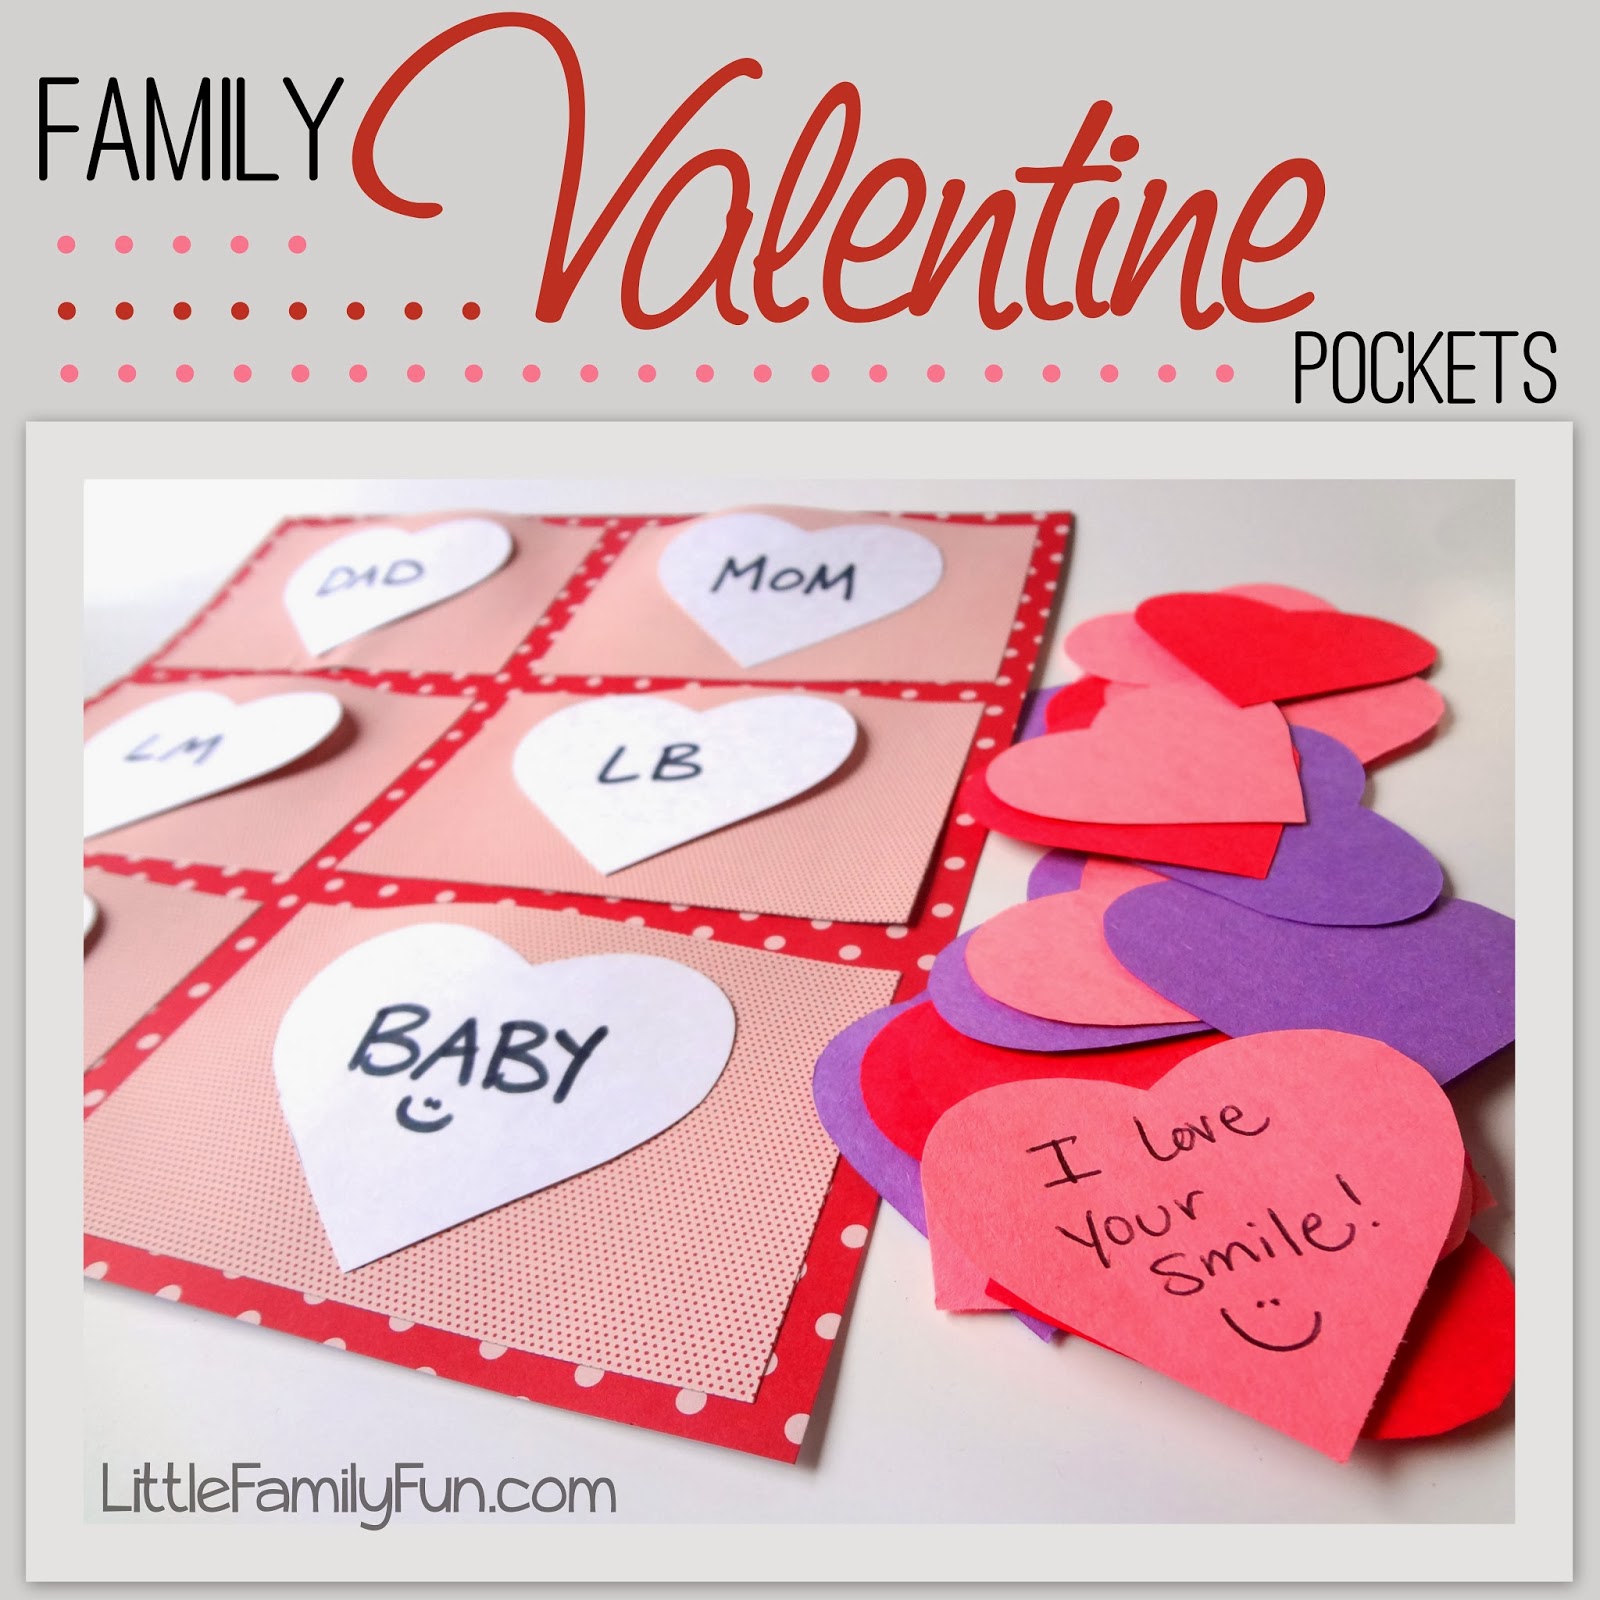 Little Family Fun Valentine's Day Crafts & Activities for kids!